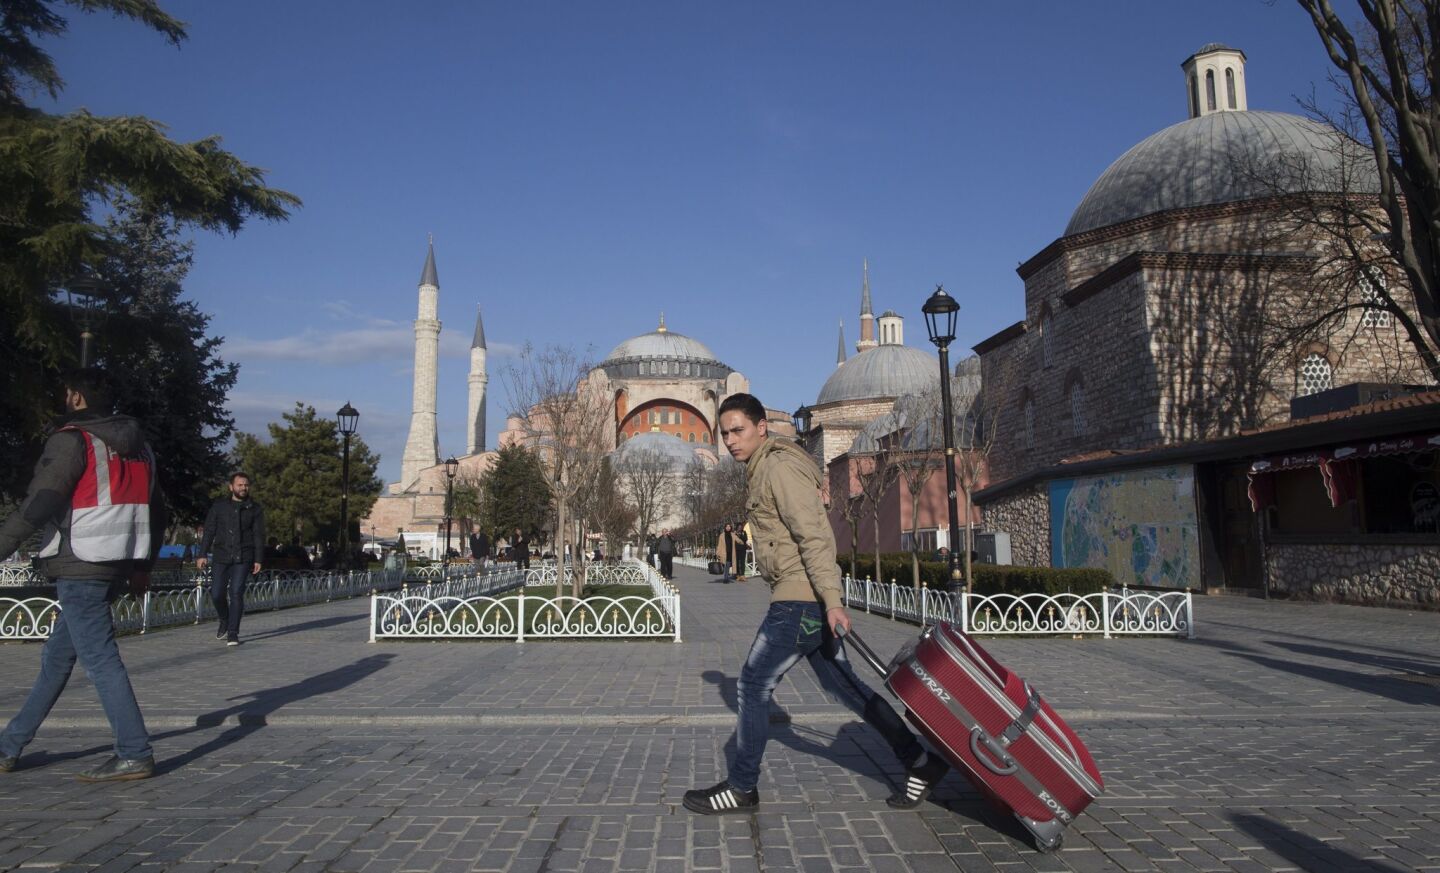 A tourist passes in front of Hagia Sophia Museum after an explosion at the nearby Blue Mosque.